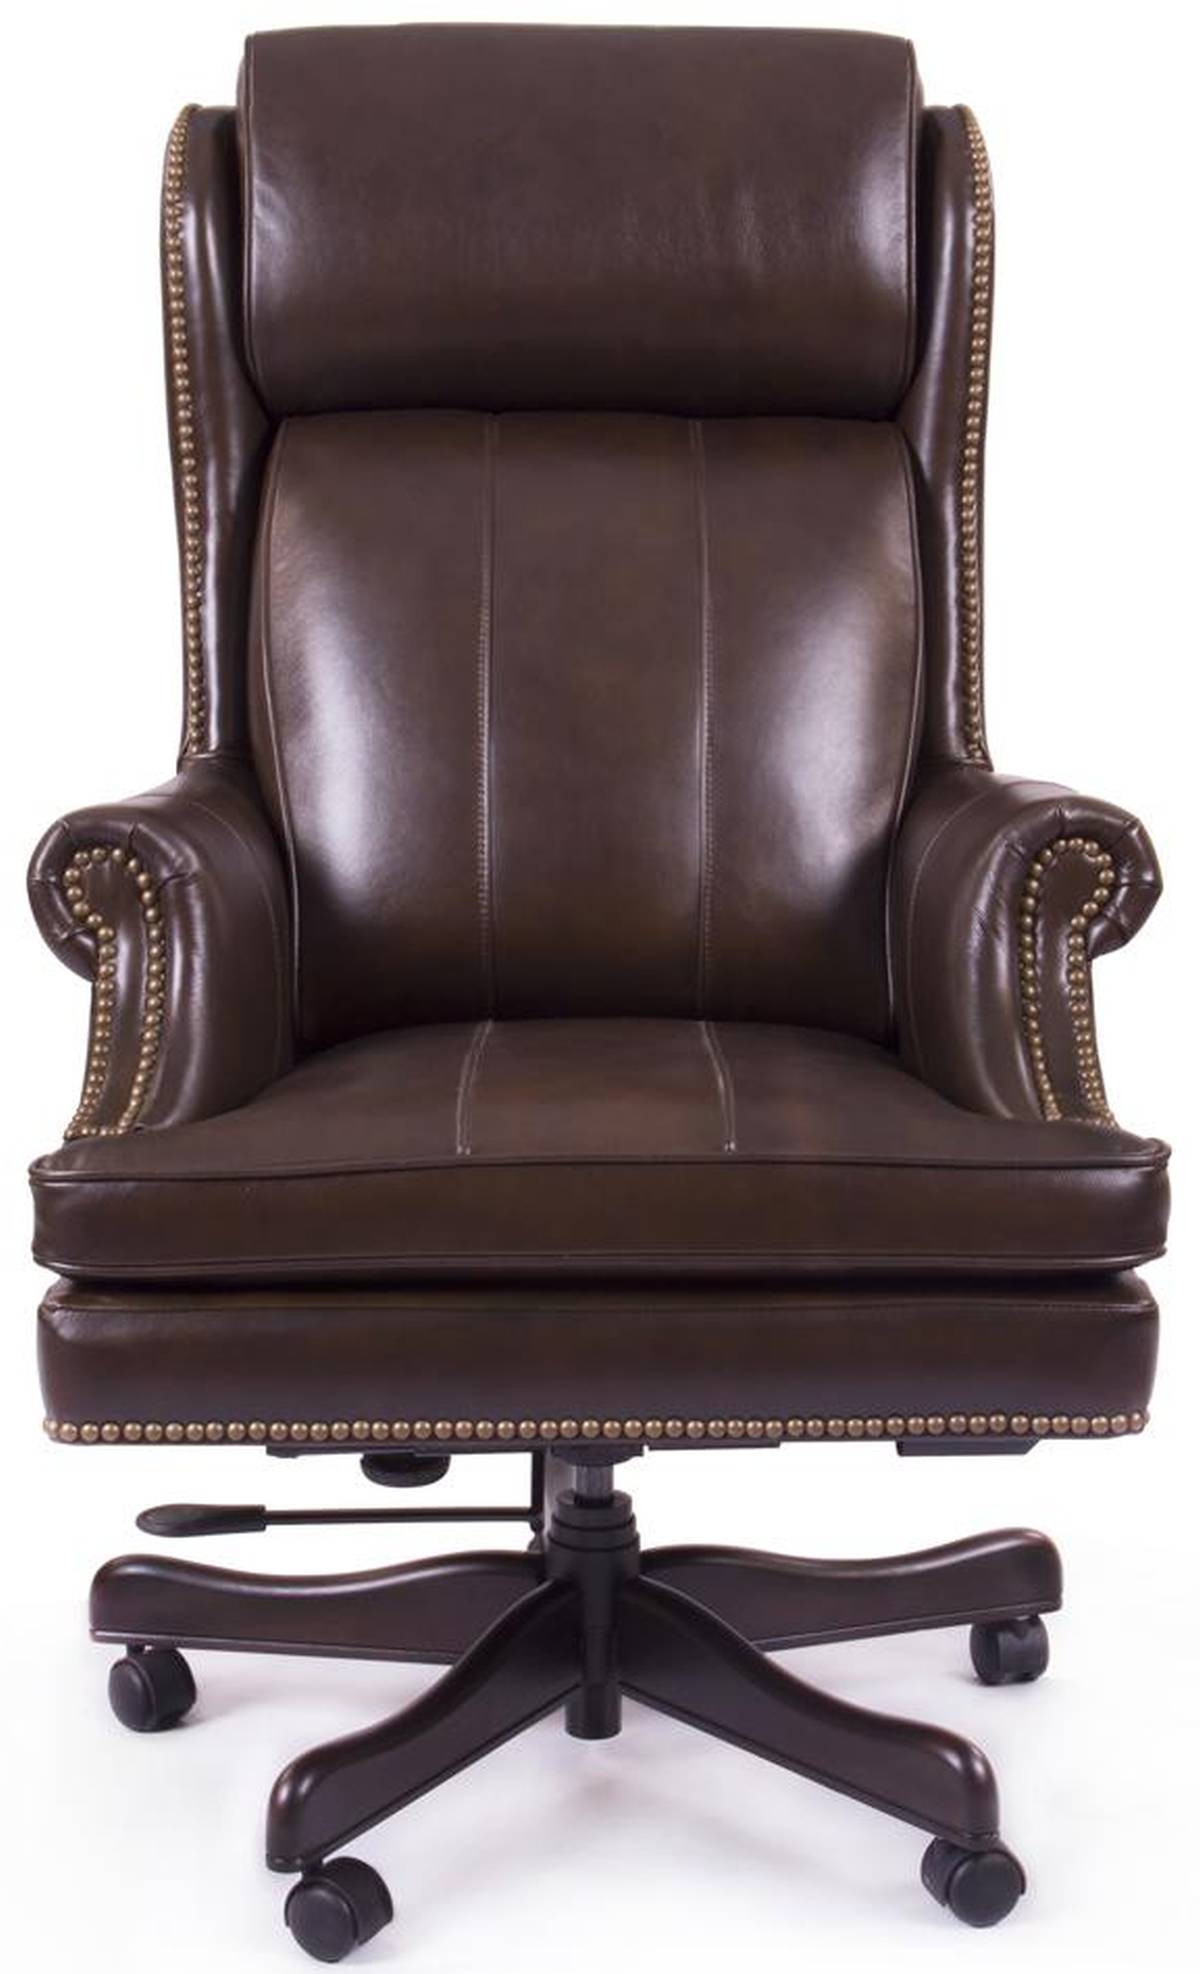 Details about   Brown Swivel Adjustable Office Desk Chair with Casters Office Work Leather 